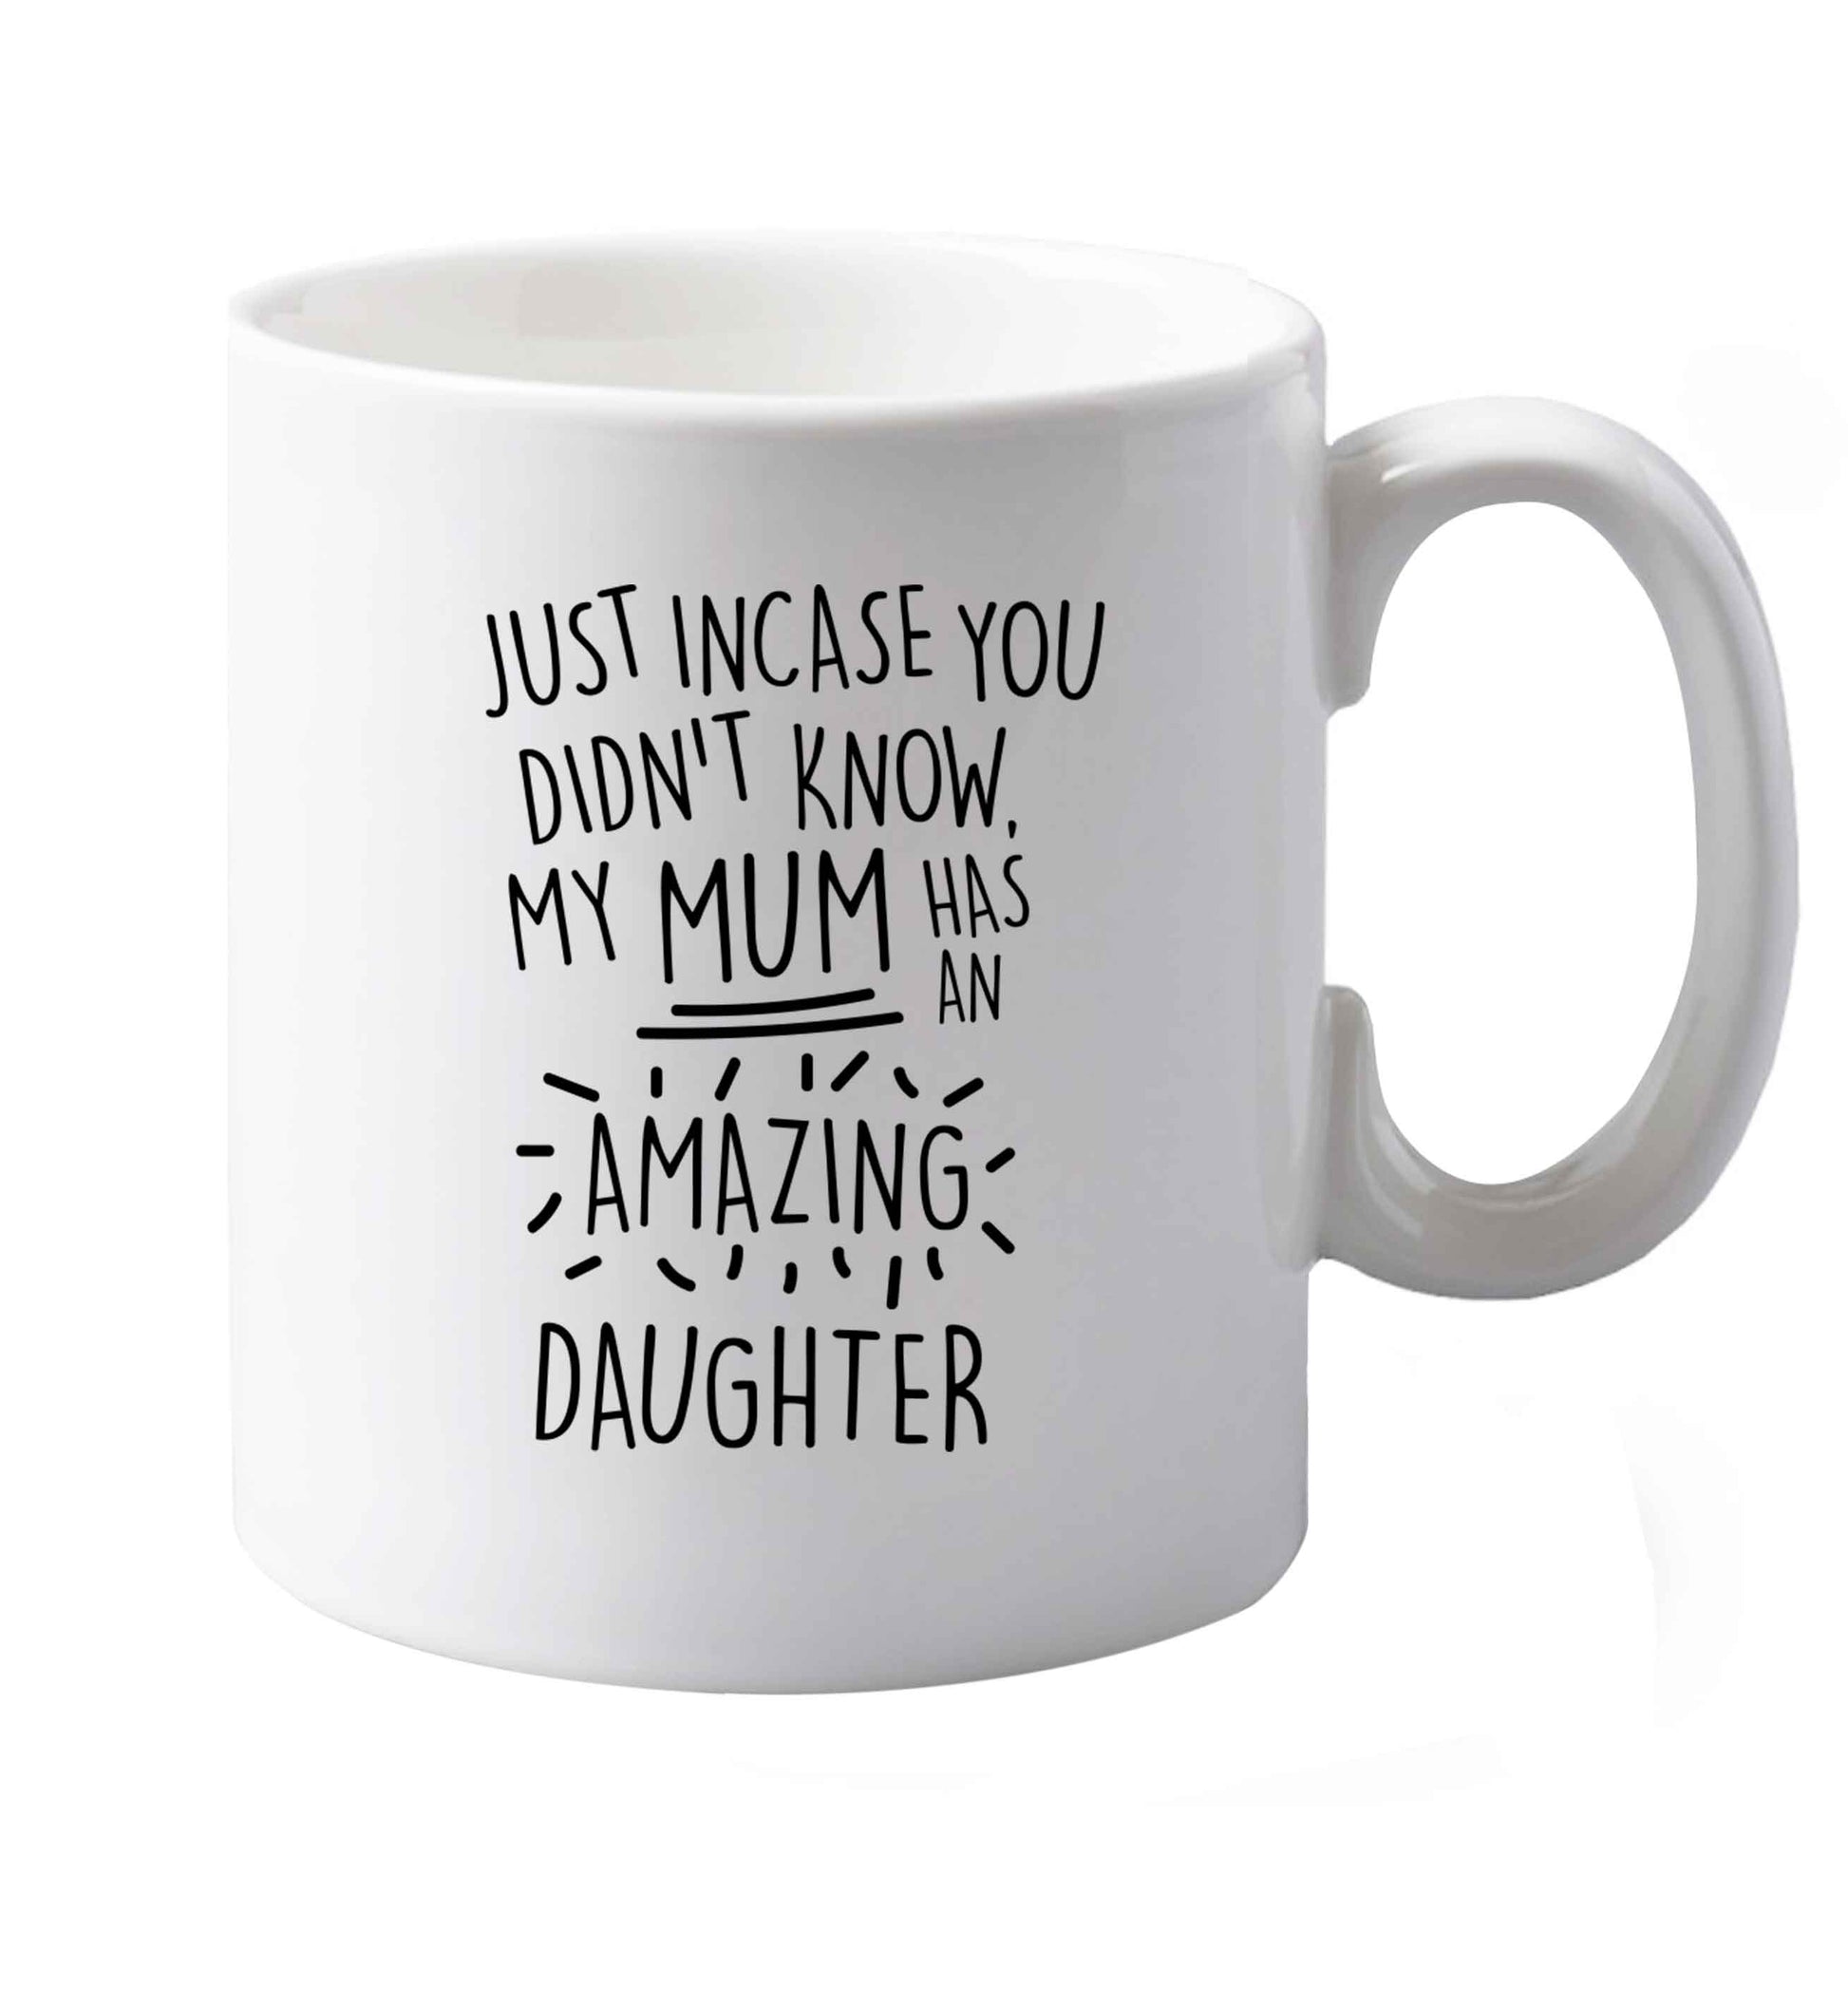 10 oz Just incase you didn't know my mum has an amazing daughter ceramic mug both sides